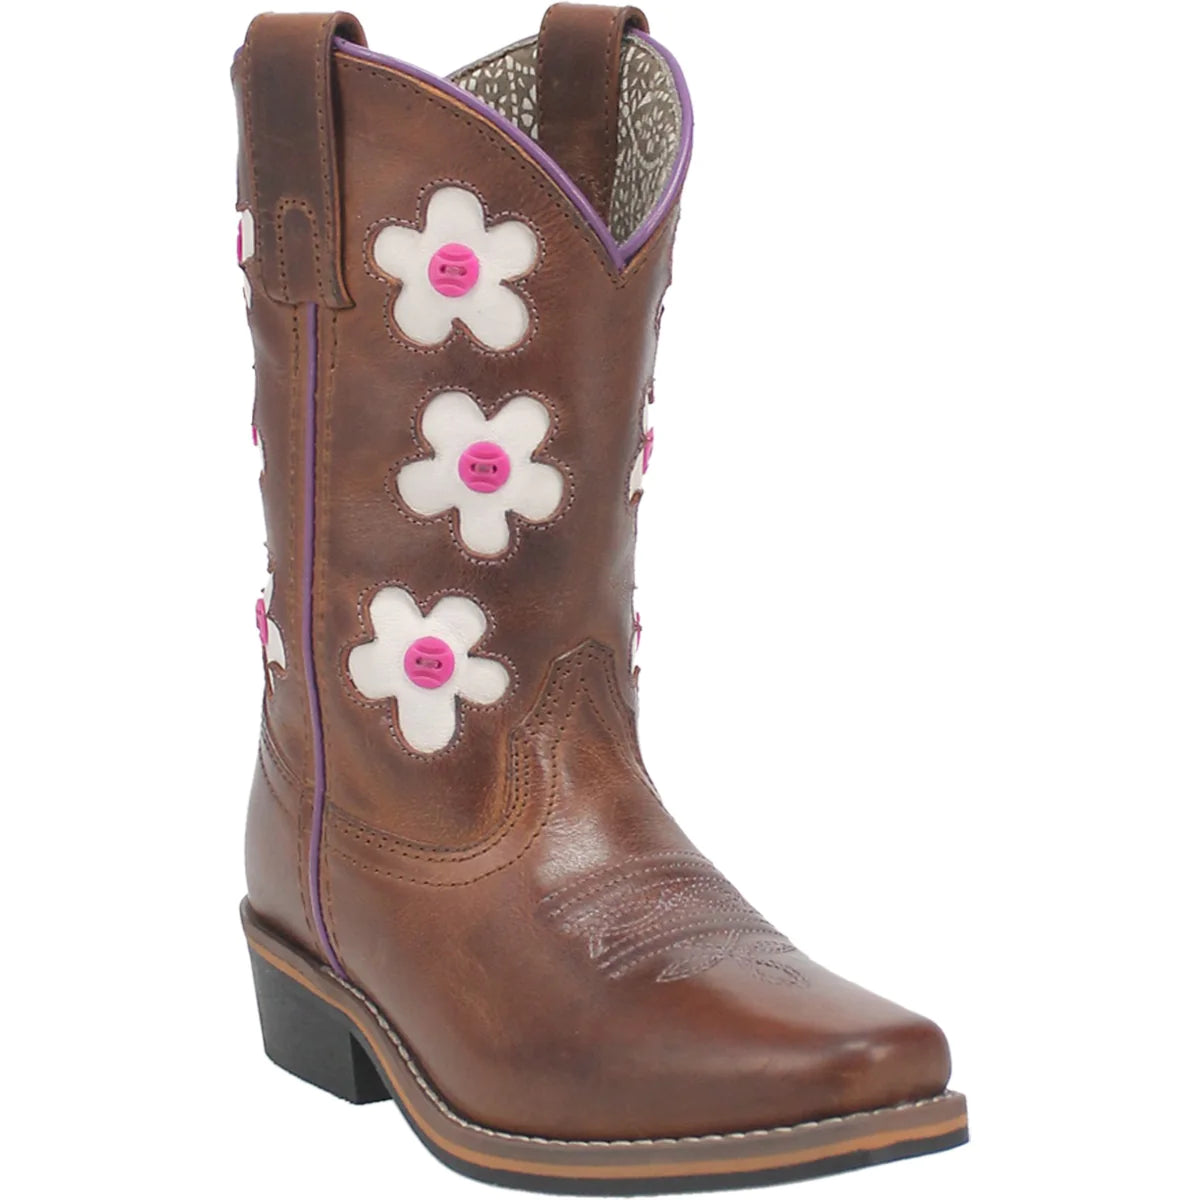 Dan Post Boots Kids Girls Giselle Floral Tooled Inlay Square Toe YOUTH DPC3903